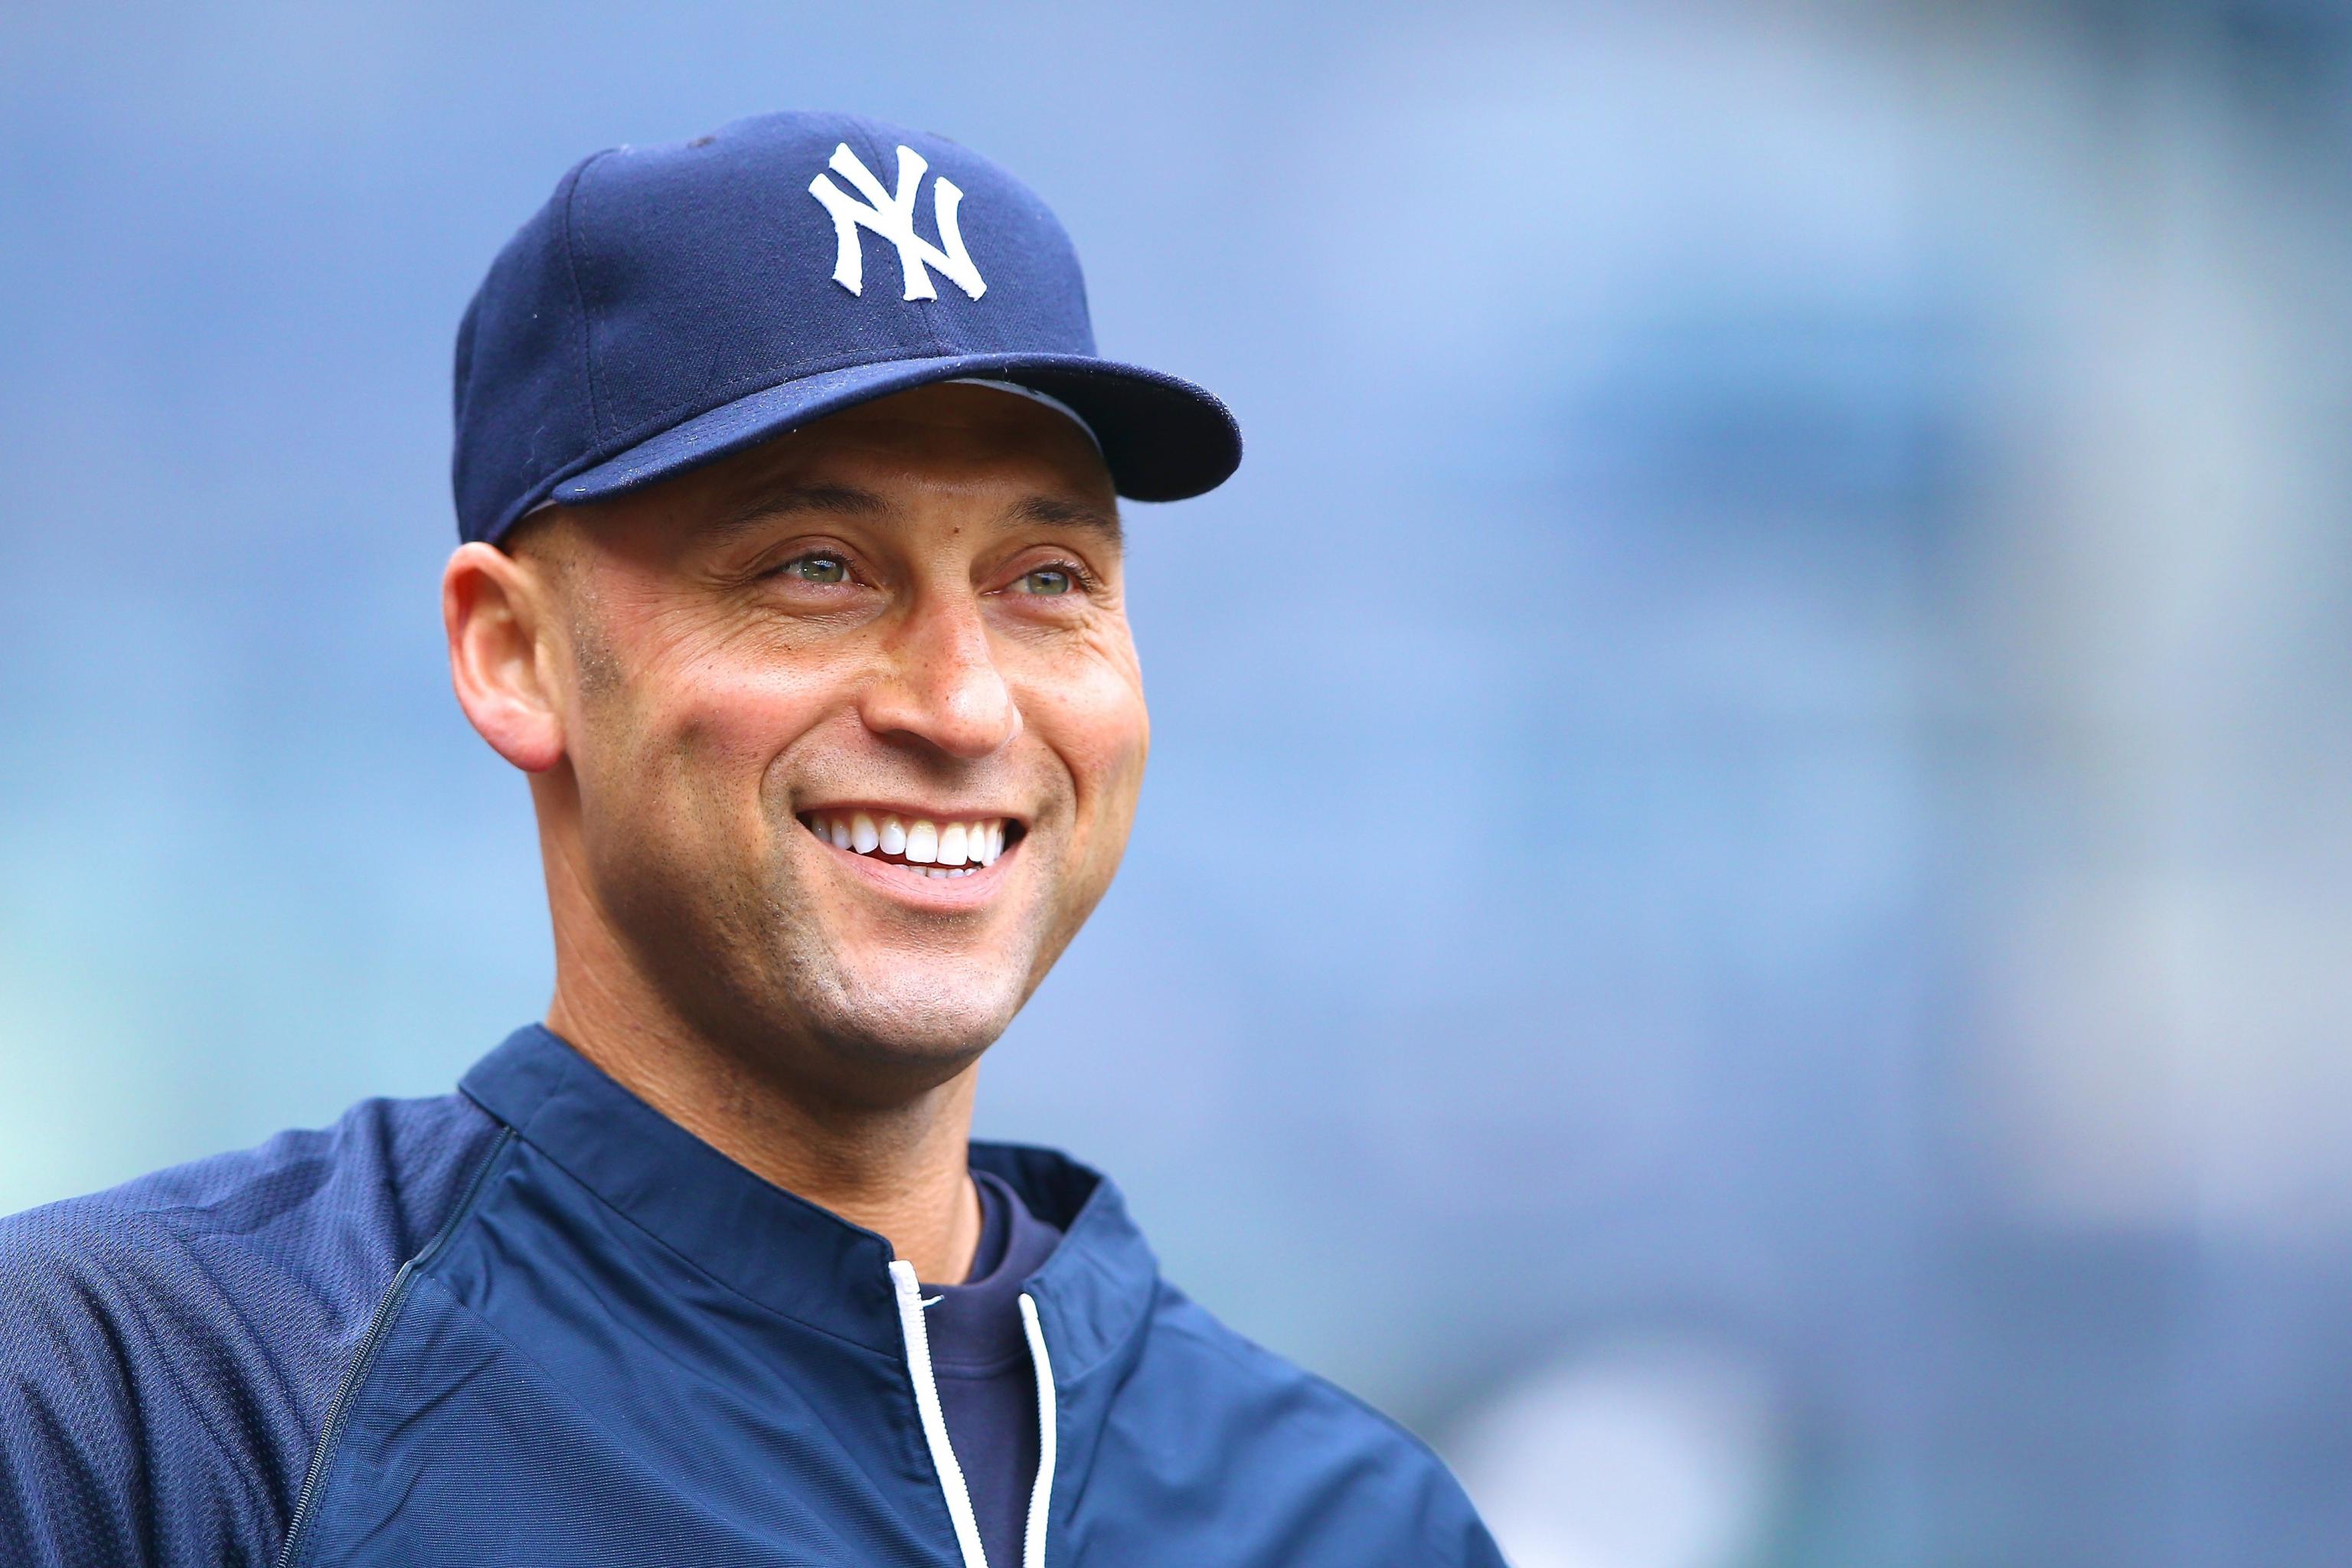 Yankees Tickets For Derek Jeter's Final Home Game 598% More